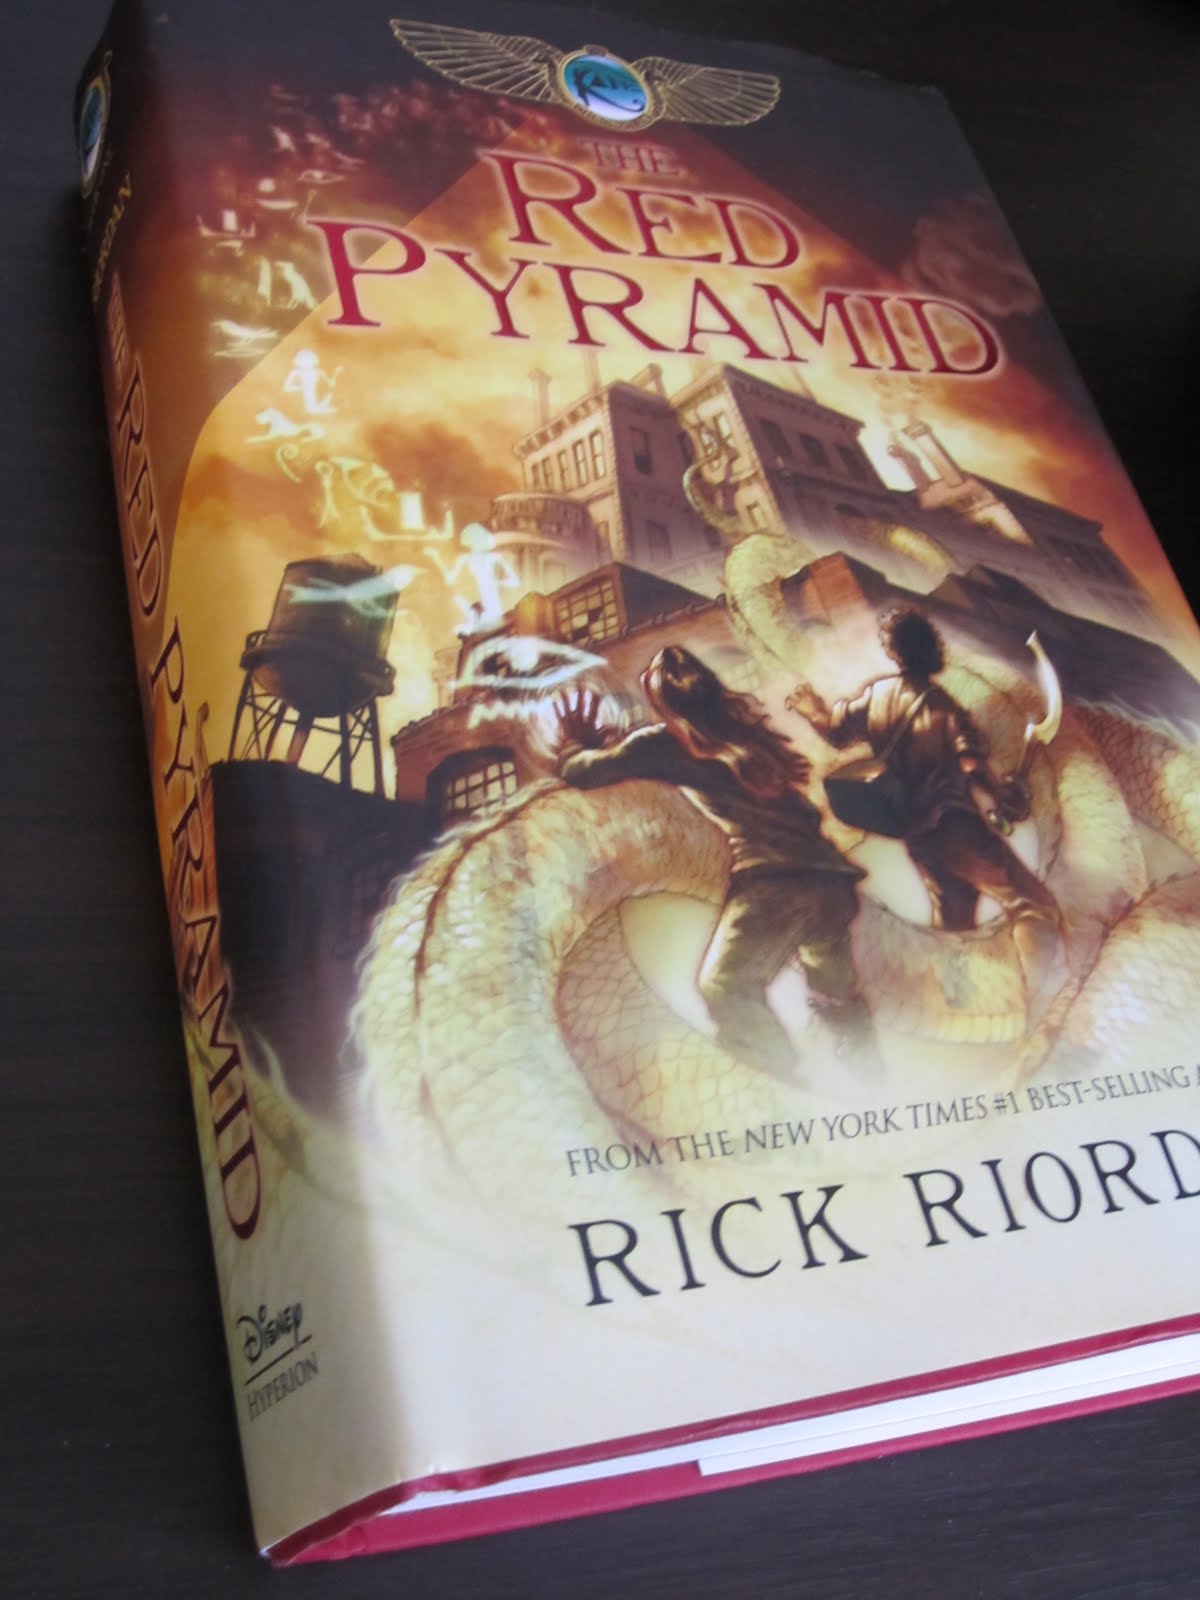 The Best Weapons: Review: The Red Pyramid by Rick Riordan